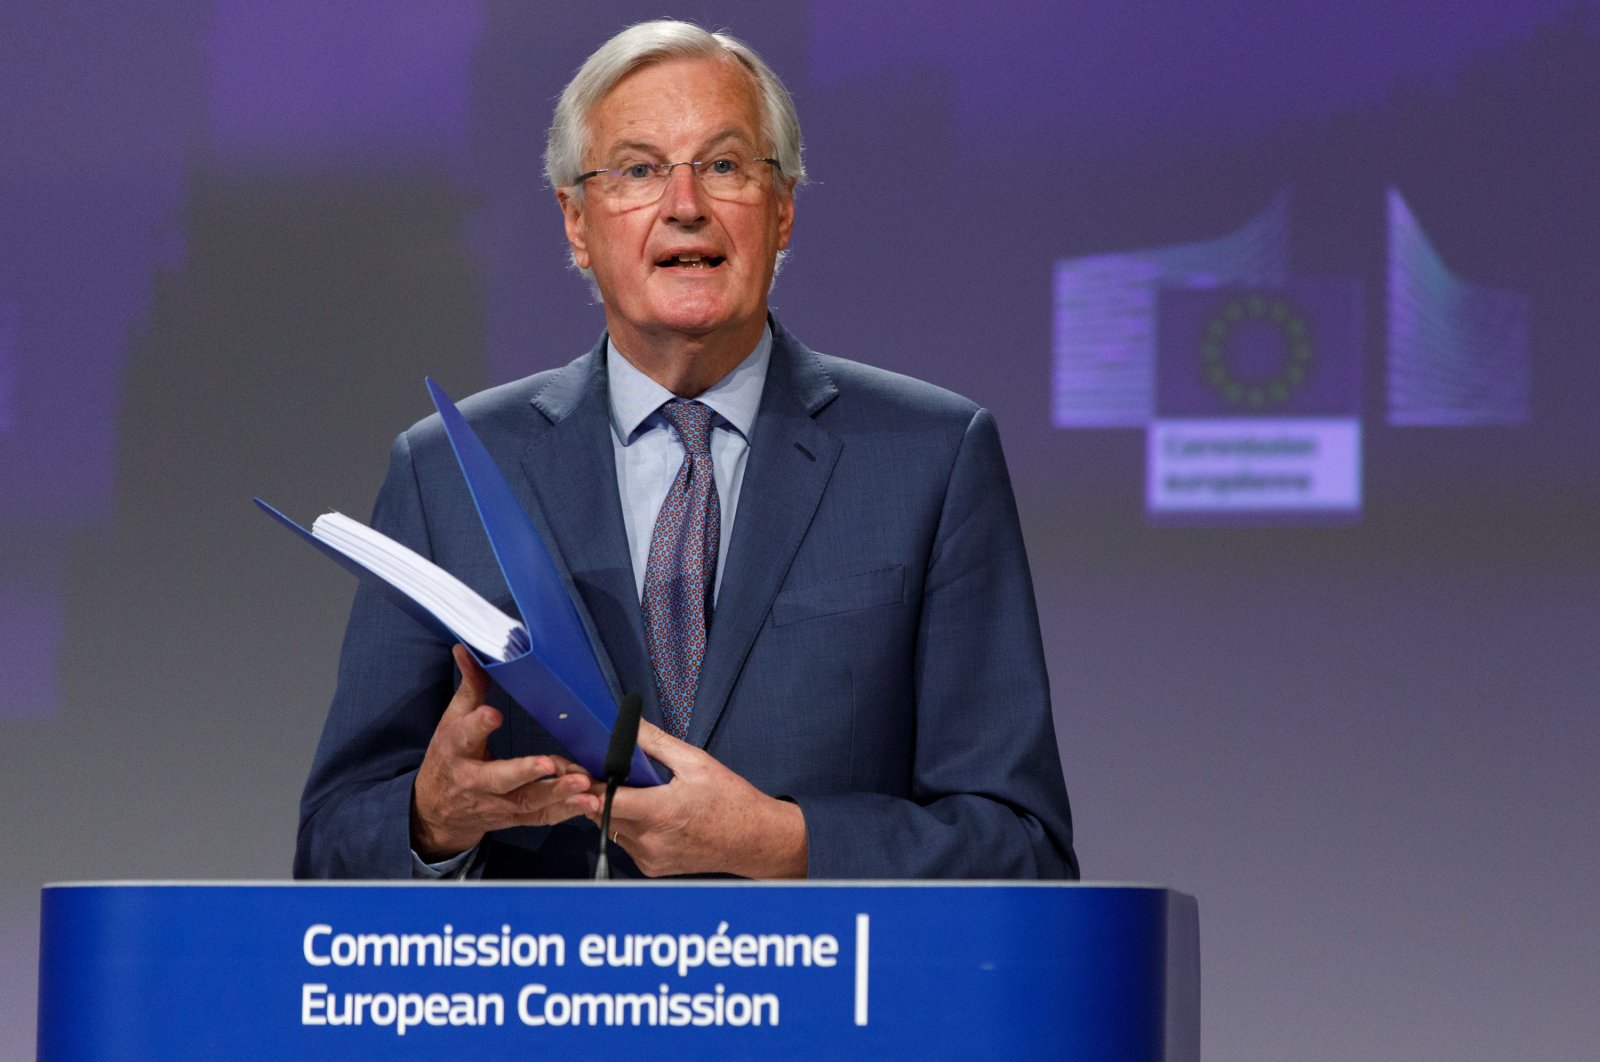 EU Chief Negotiator, Michel Barnier speaks about the trade agreement with the U.K. during a press conference in the European Commission, Brussels, April 24, 2020. (AFP Photo)